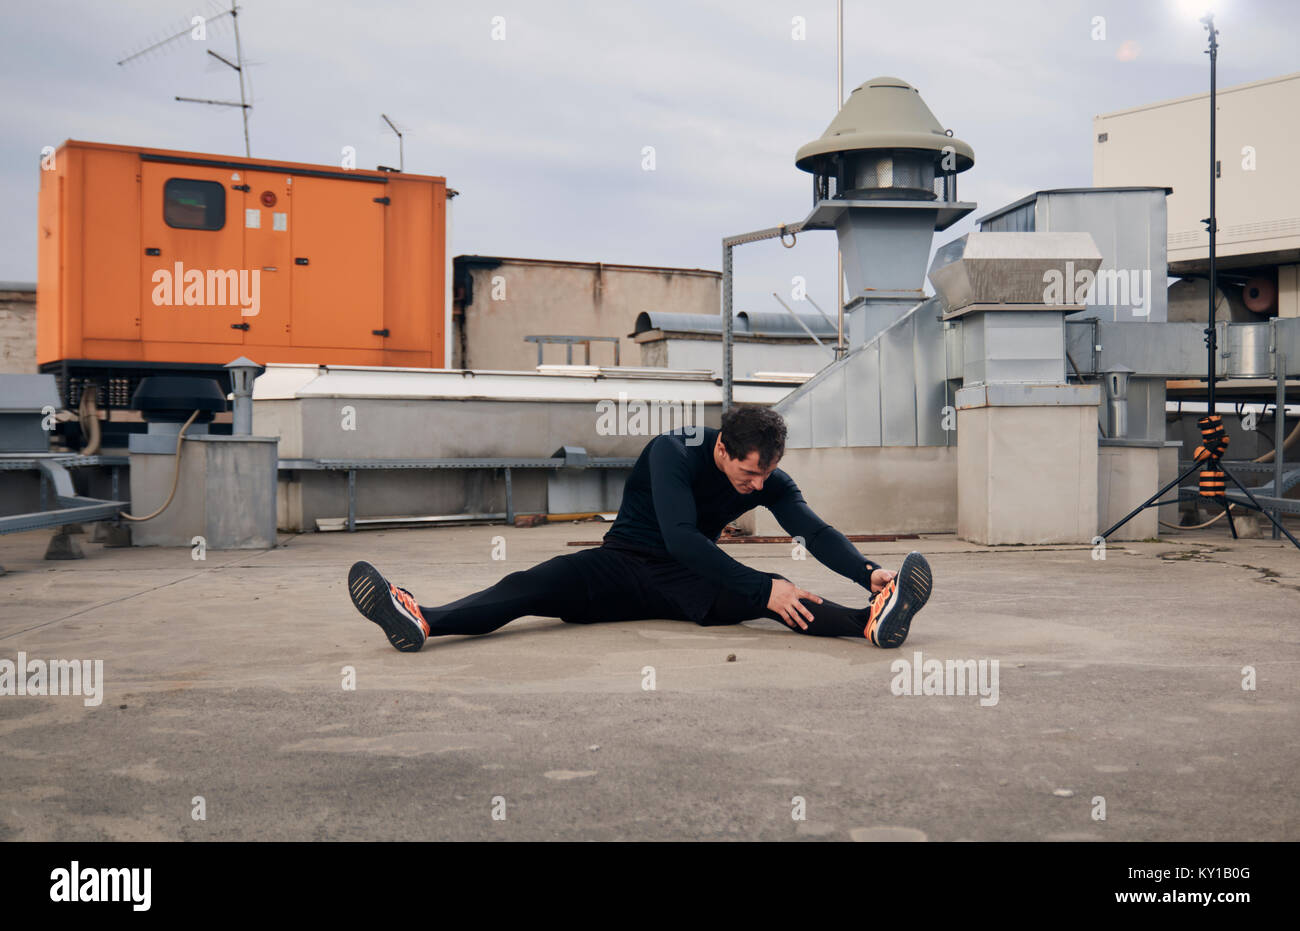 one young man stretching outdoors on rooftop of building. Heating, ventilation, and air conditioning systems. Stock Photo